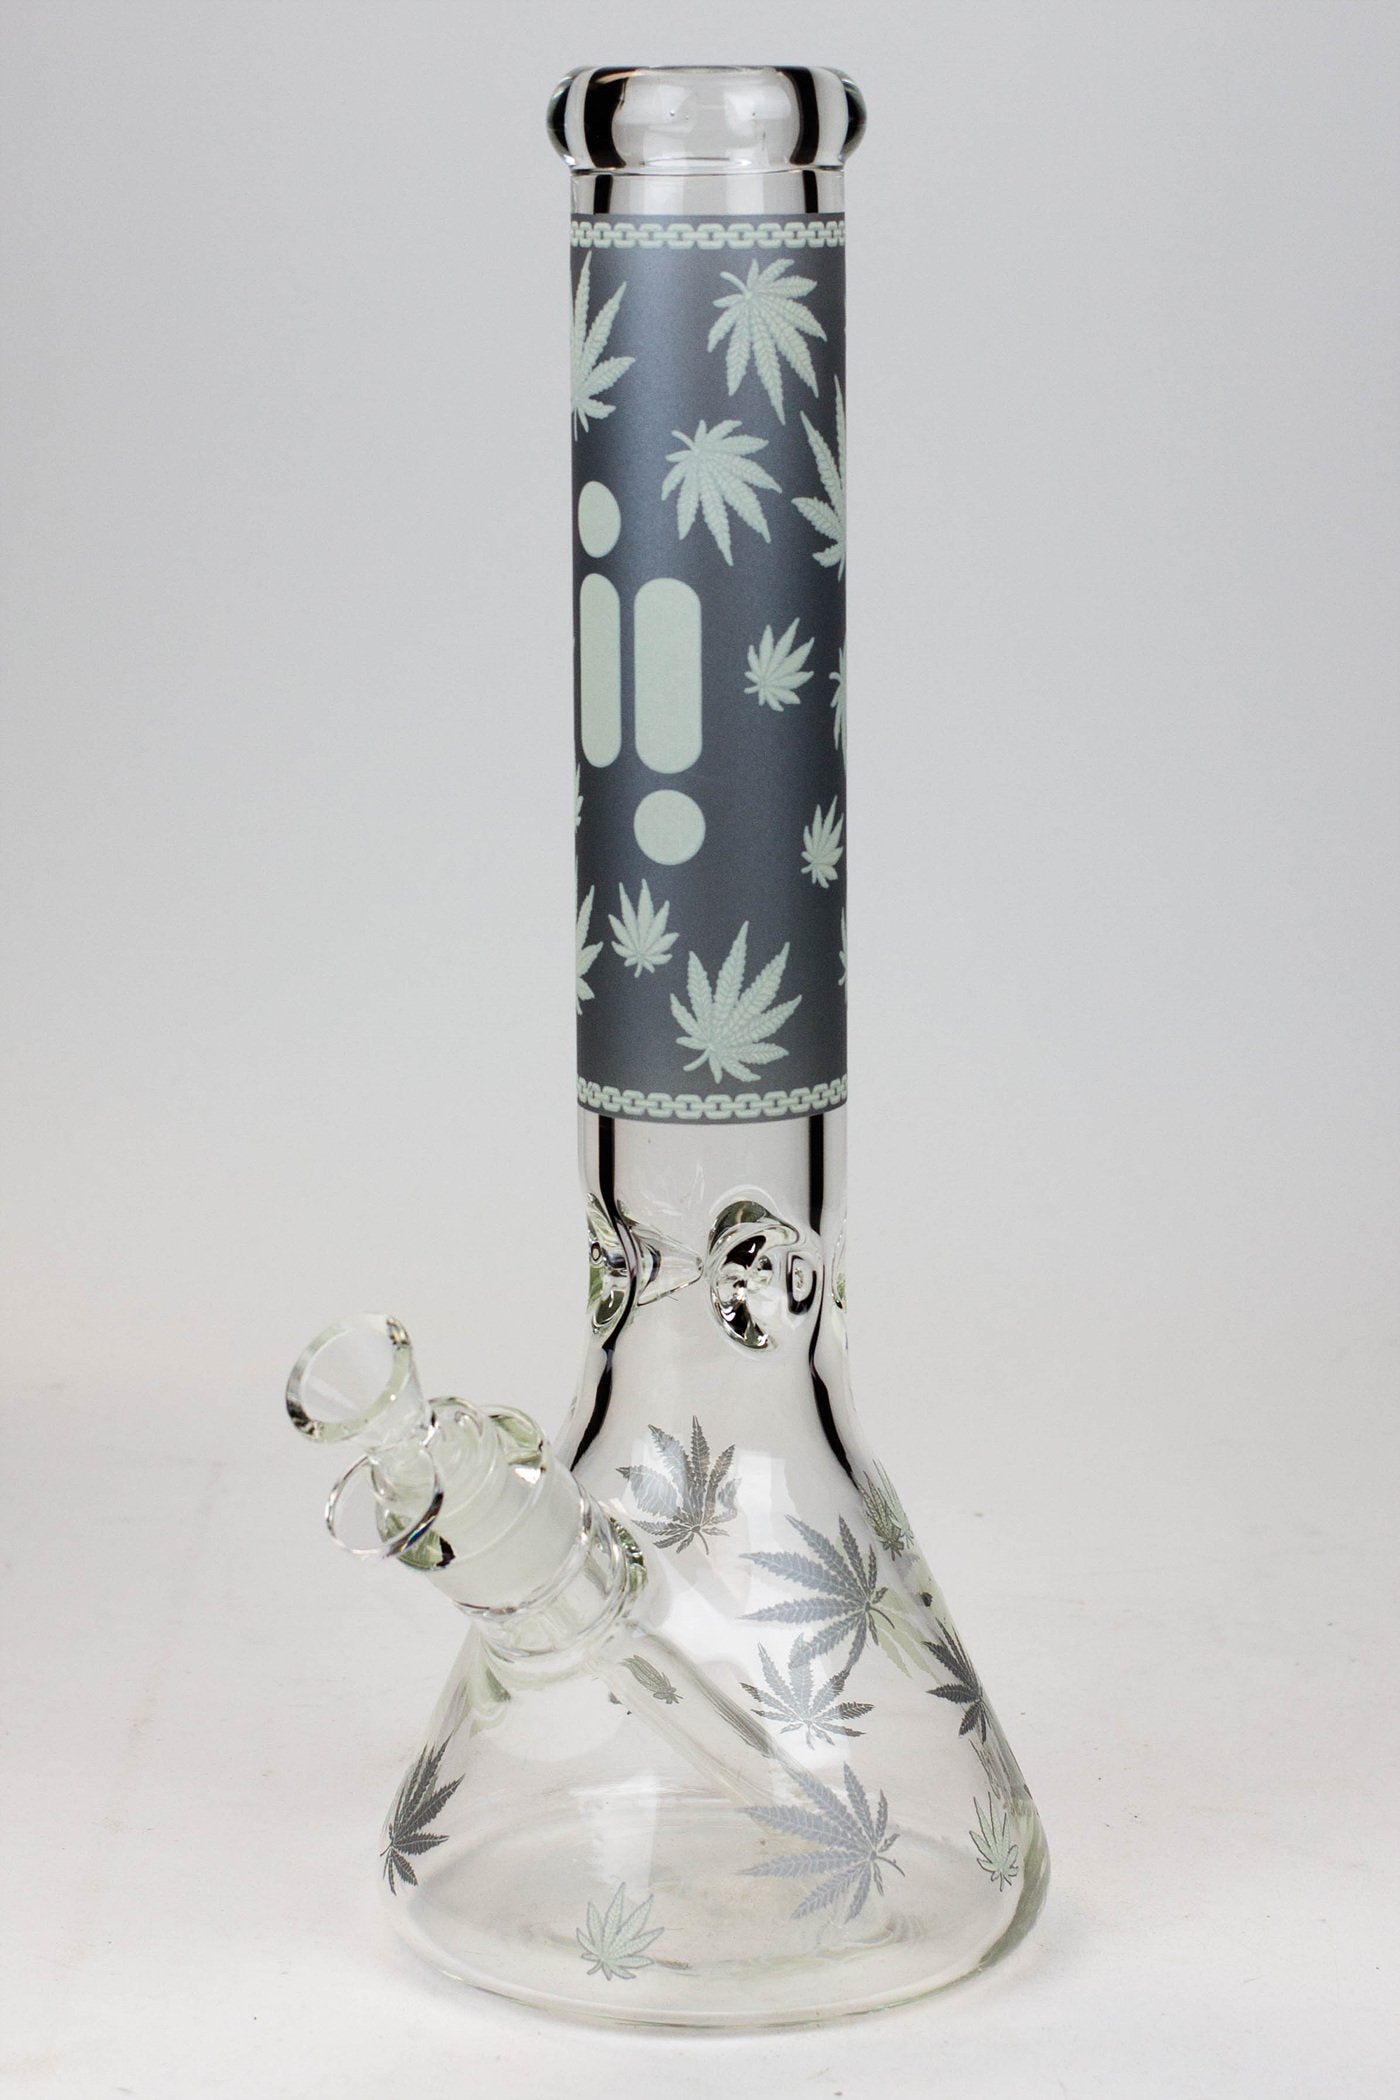 14" Infyniti Leaf Glow in the dark 7 mm glass bong Flower Power Packages Grey 